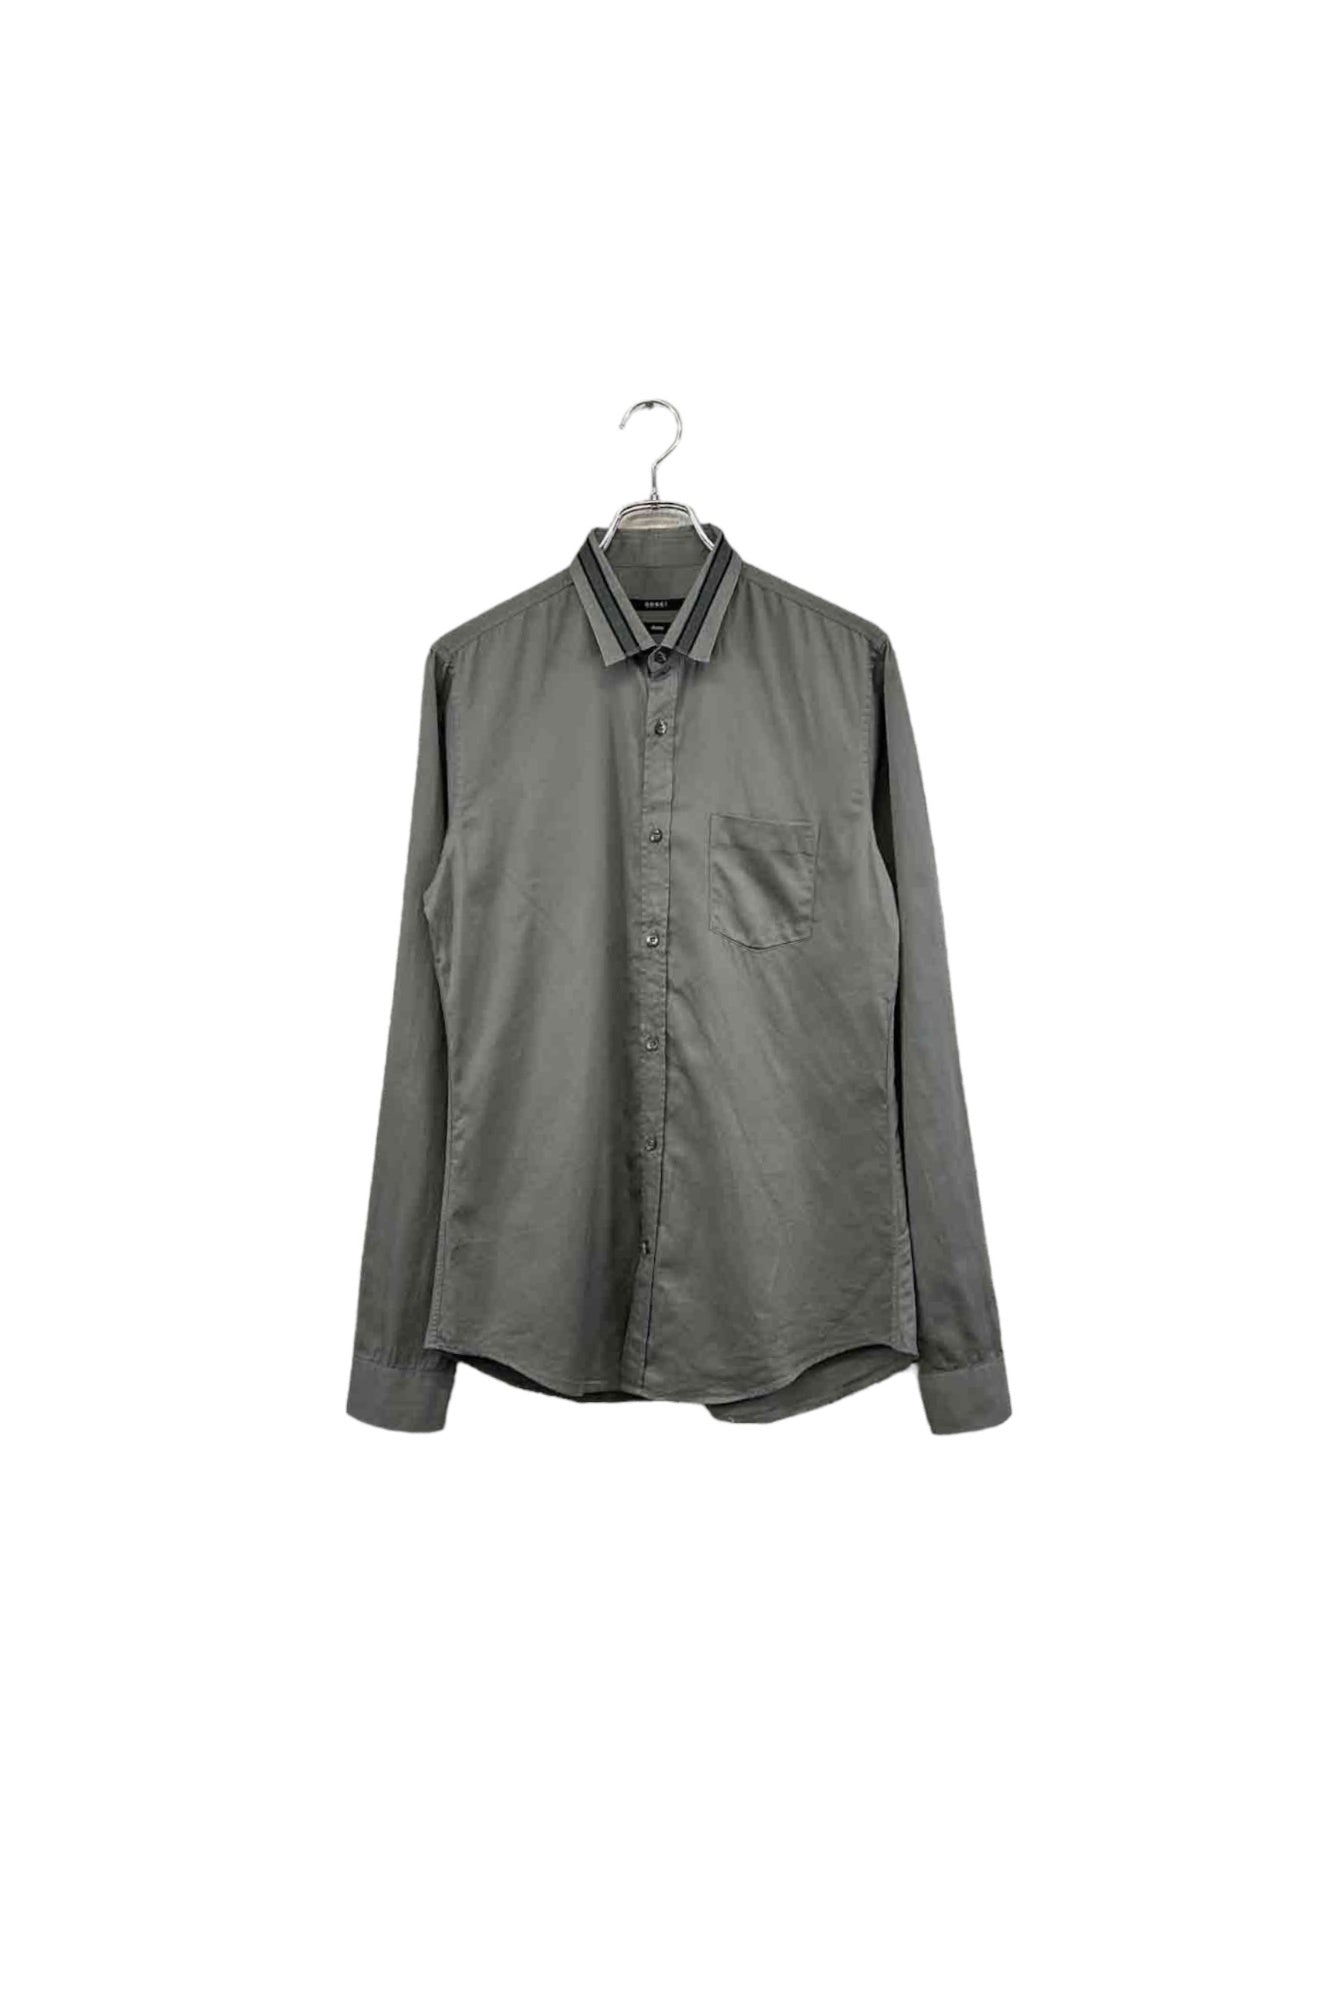 Made in Italy GUCCI grey shirt